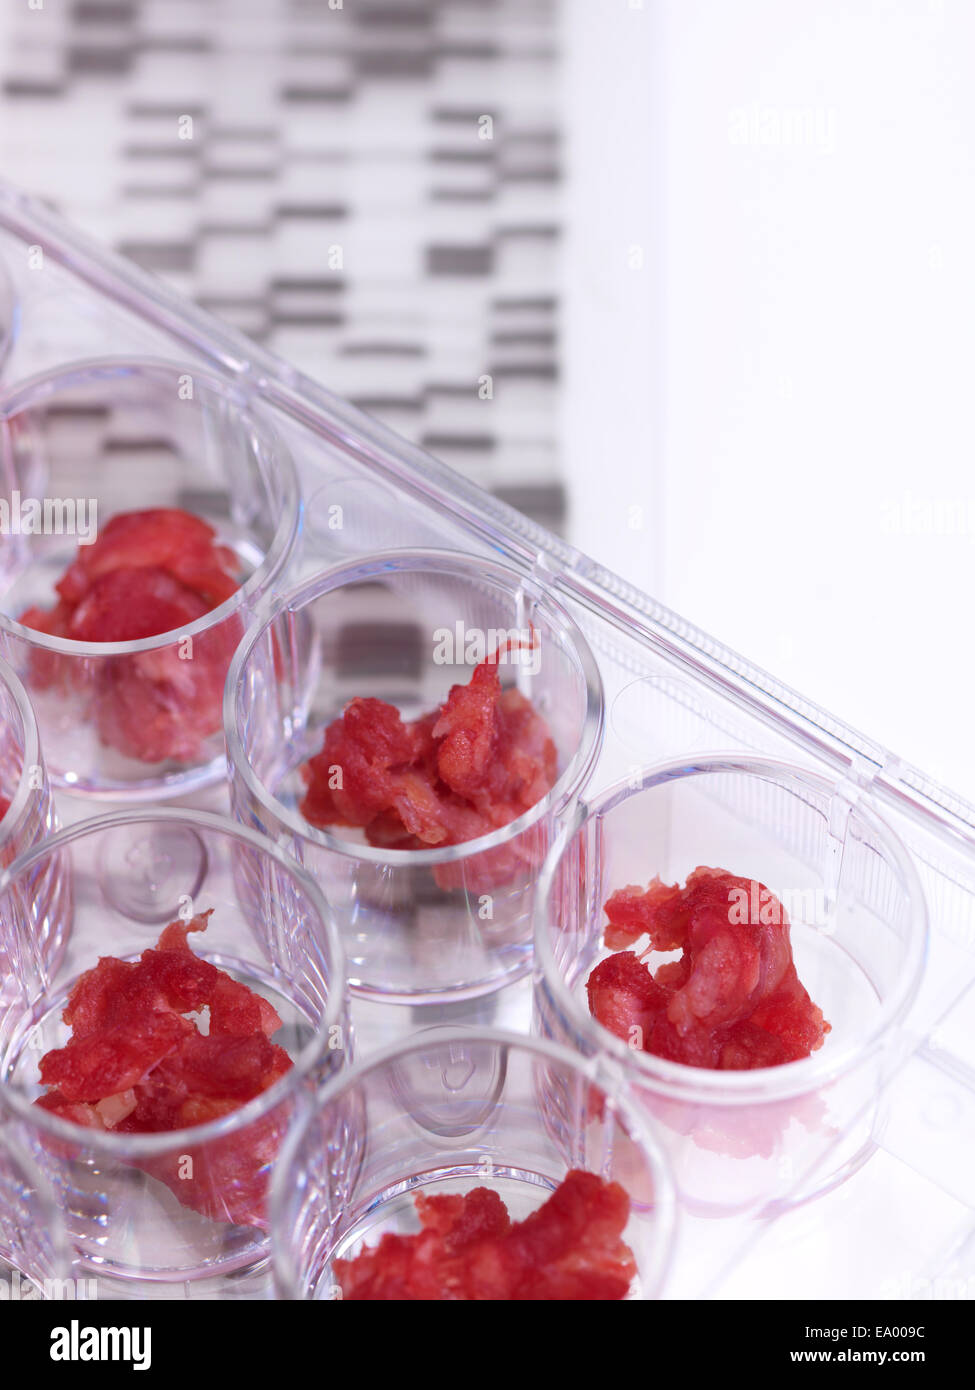 Samples of meat being DNA tested in food standards laboratory Stock Photo